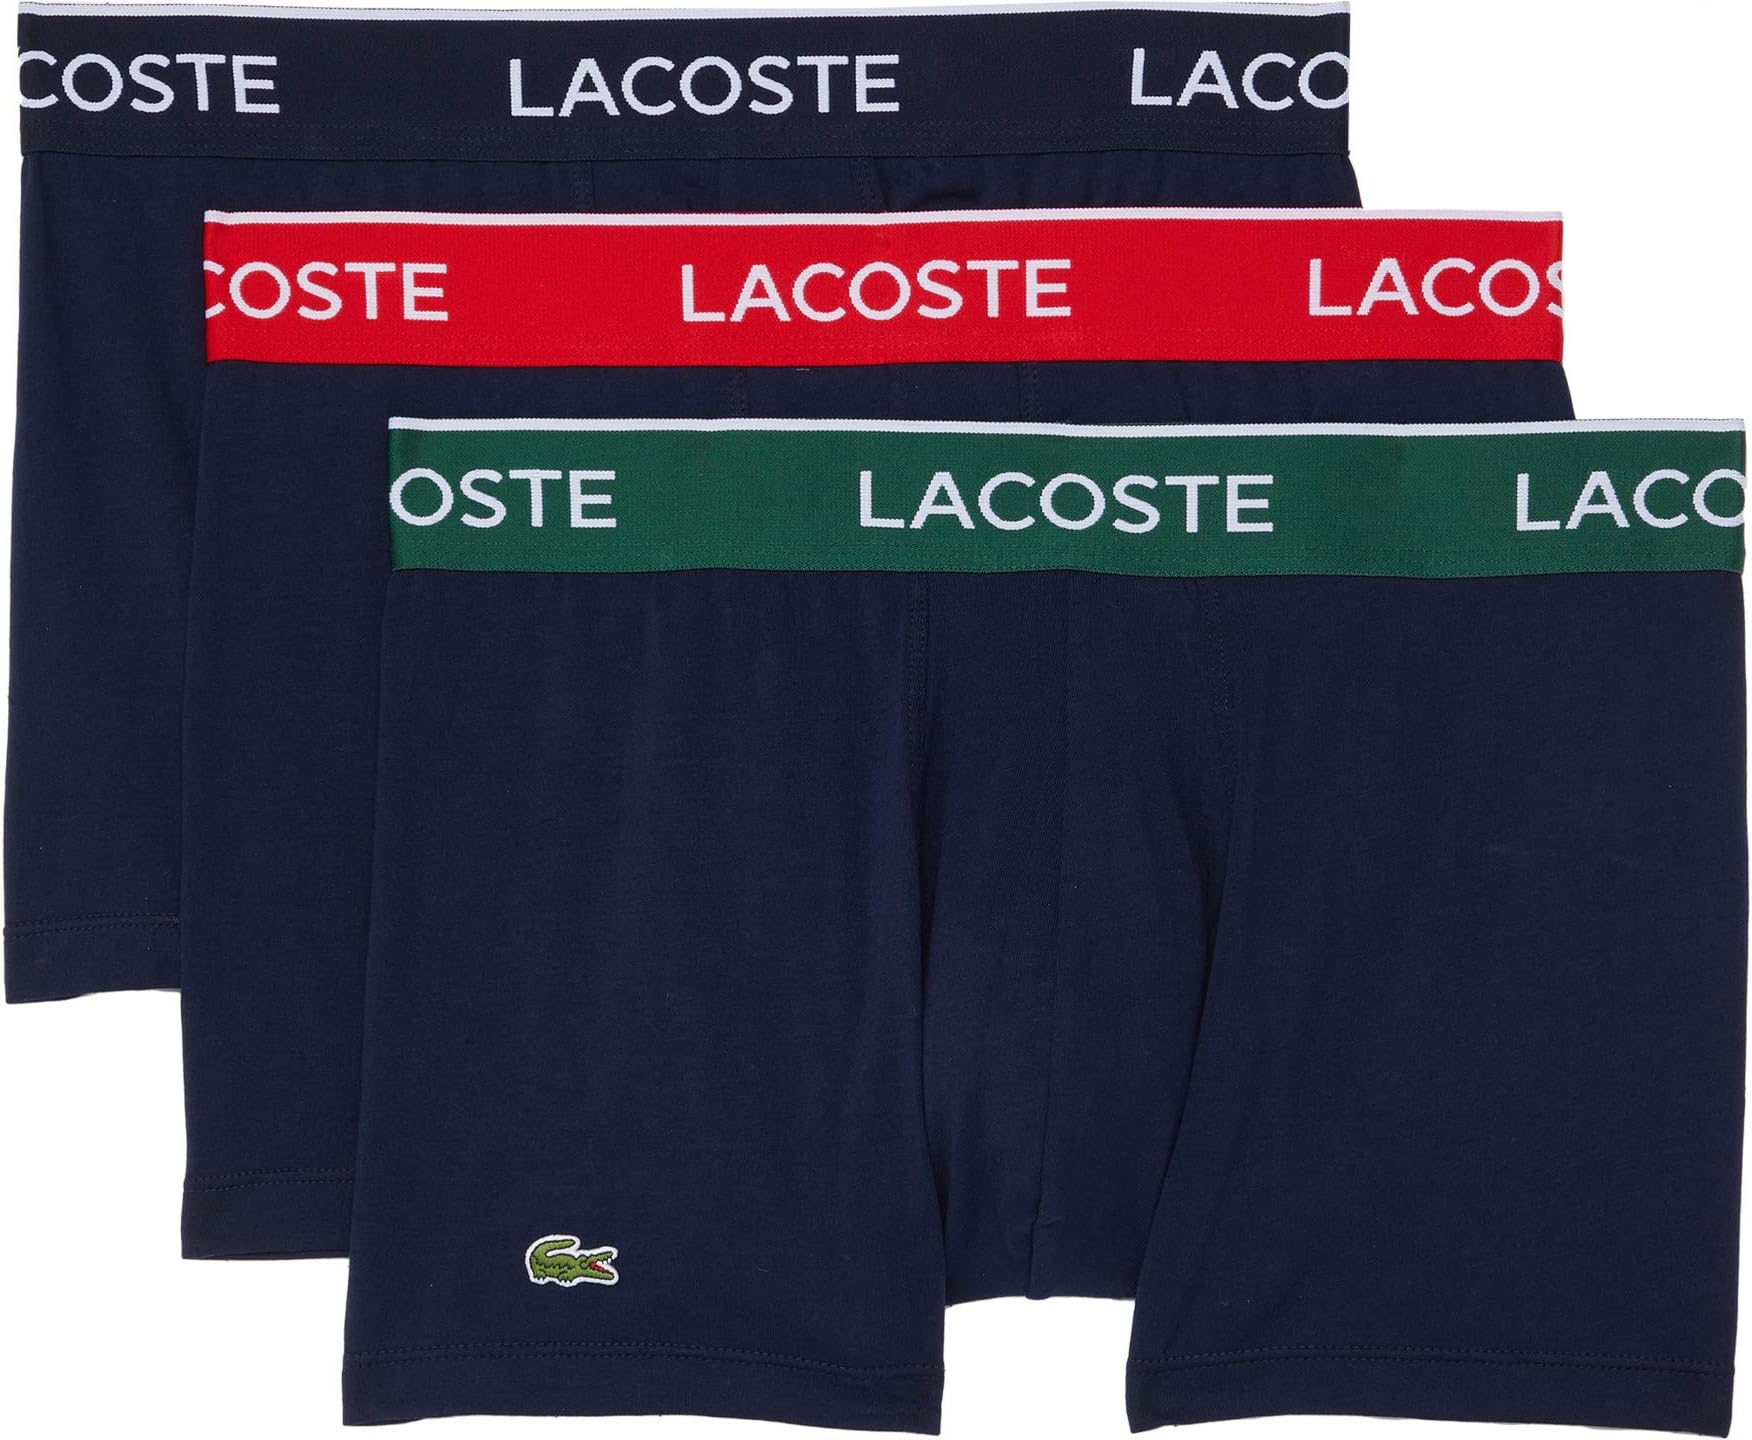 Трусы Trunks 3-Pack Casual Classic Colorful Waistband Lacoste, цвет Navy Blue/Green/Red/Navy Blue 2% ceriated tungsten electrodes red blue green grey